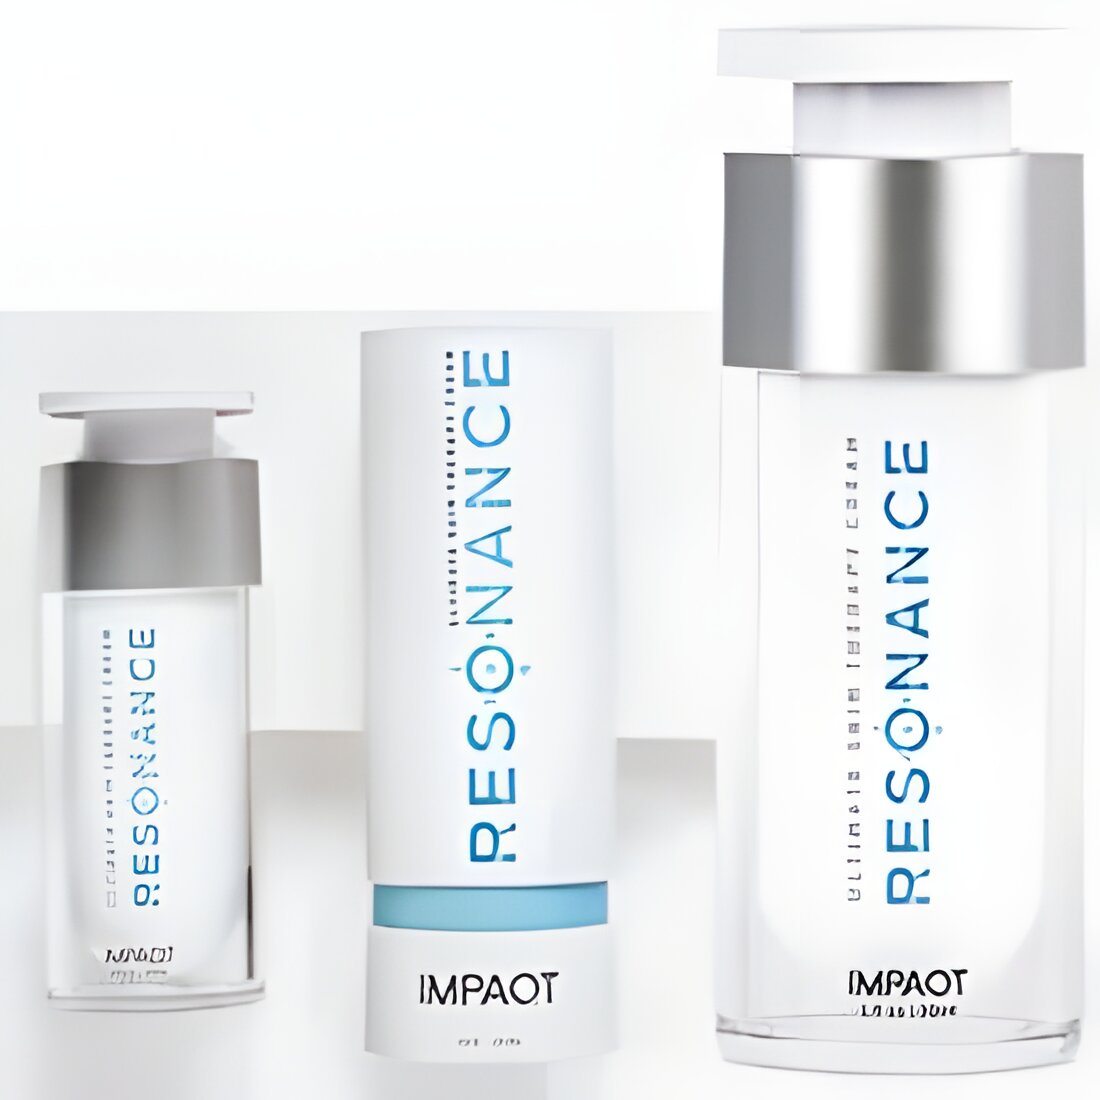 Free Sample Packets of Resonance 396 Skin Therapy Cream